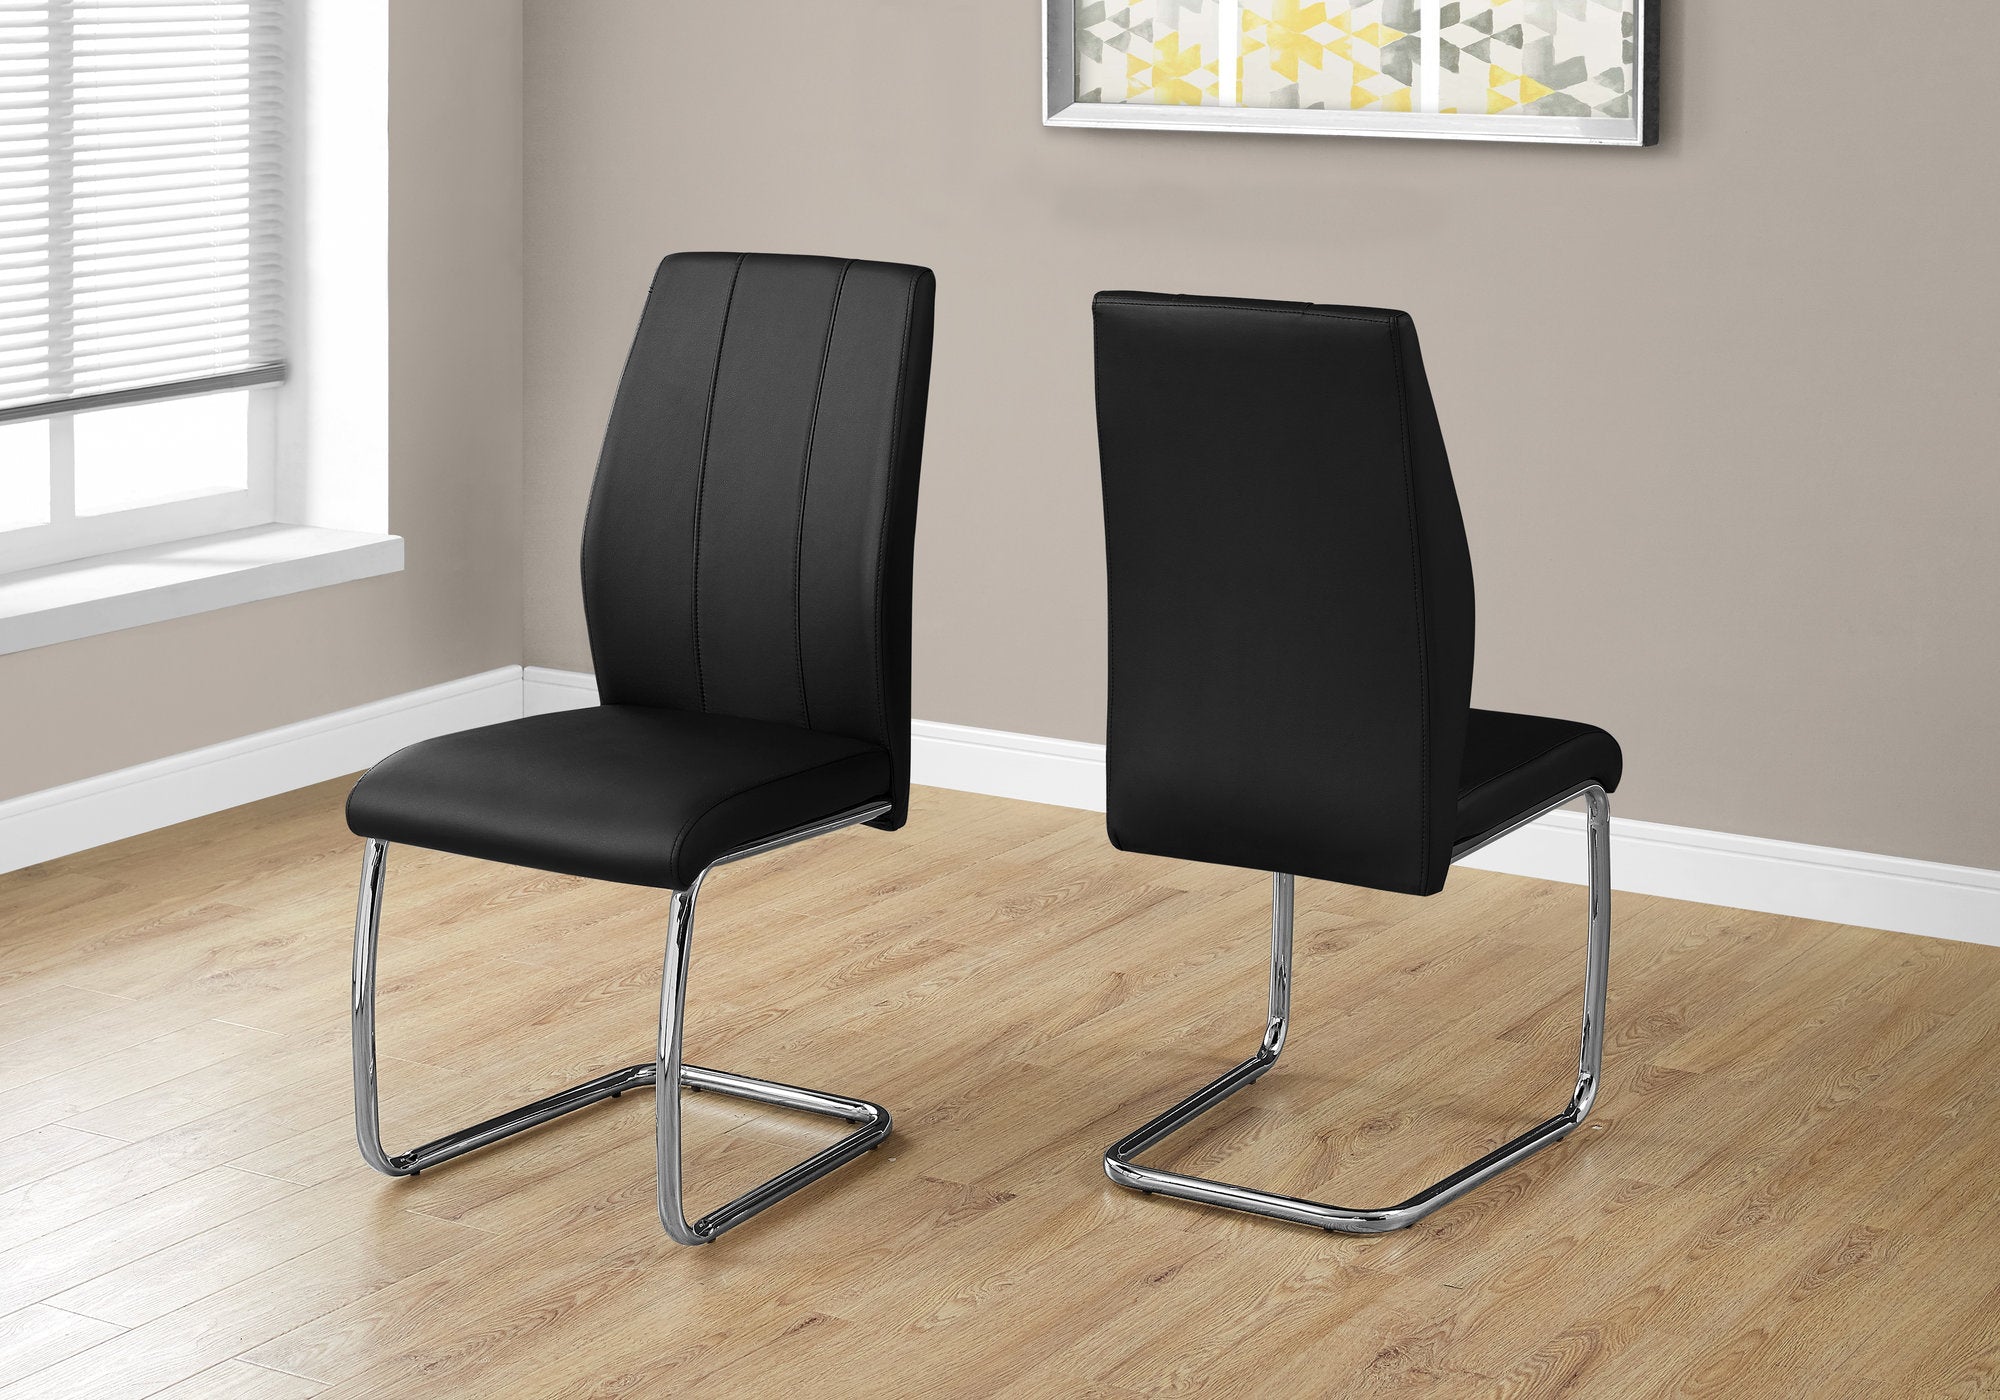 MN-401076    Dining Chair, Set Of 2, Side, Pu Leather-Look, Upholstered, Metal Legs, Kitchen, Dining Room, Faux Leather, Metal Legs, Black, Chrome, Contemporary, Modern